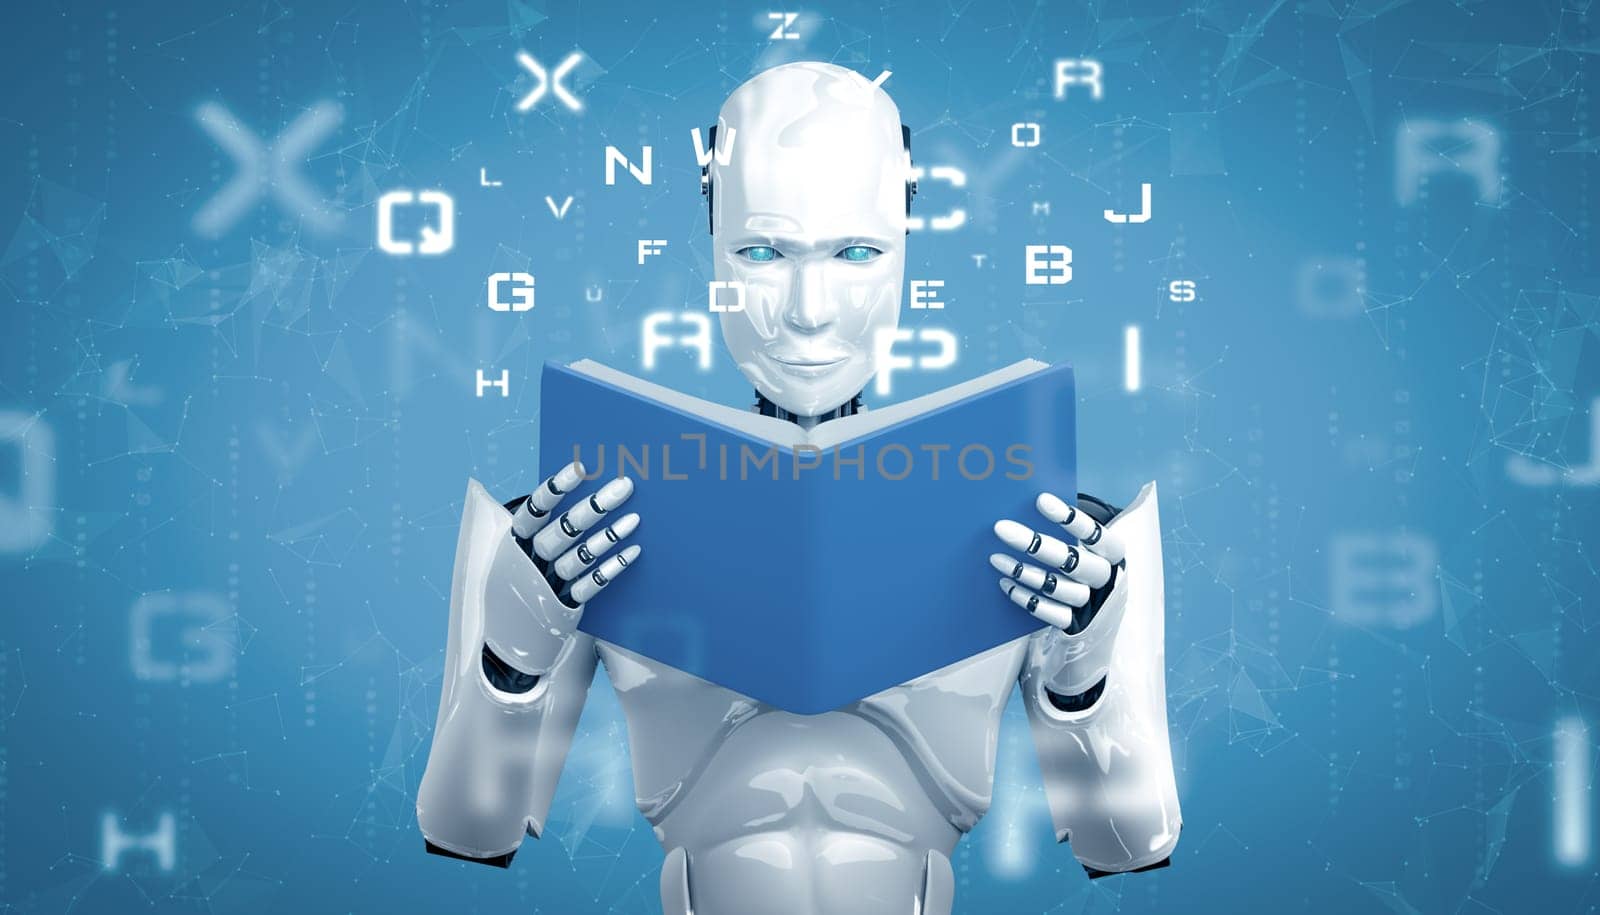 XAI 3d illustration 3D illustration of robot humanoid reading book in concept of future artificial intelligence and 4th fourth industrial revolution.